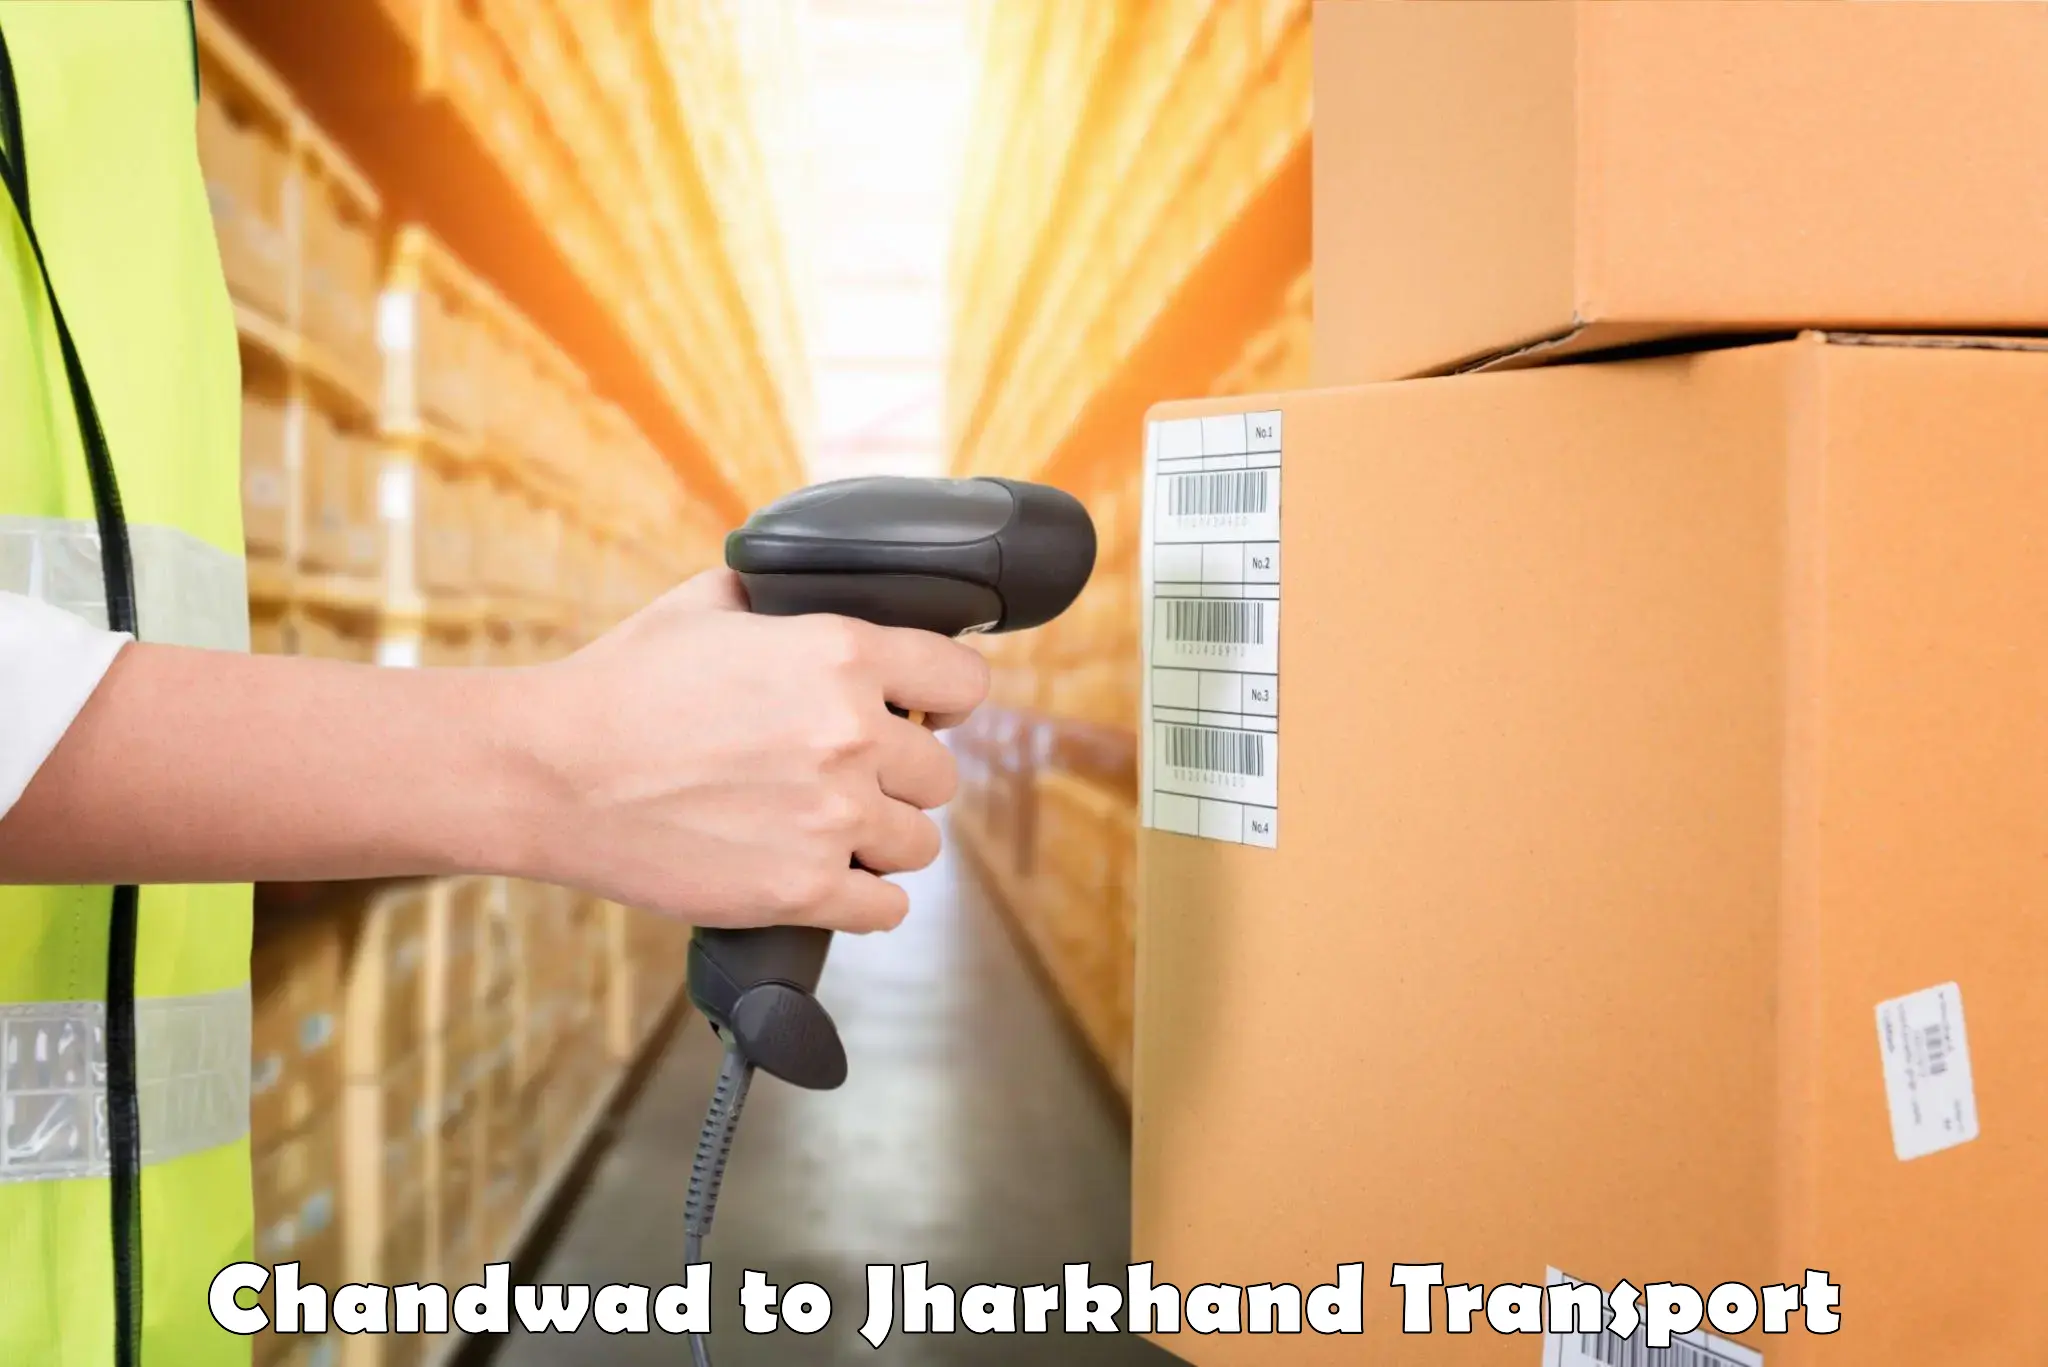 Delivery service Chandwad to Jamshedpur